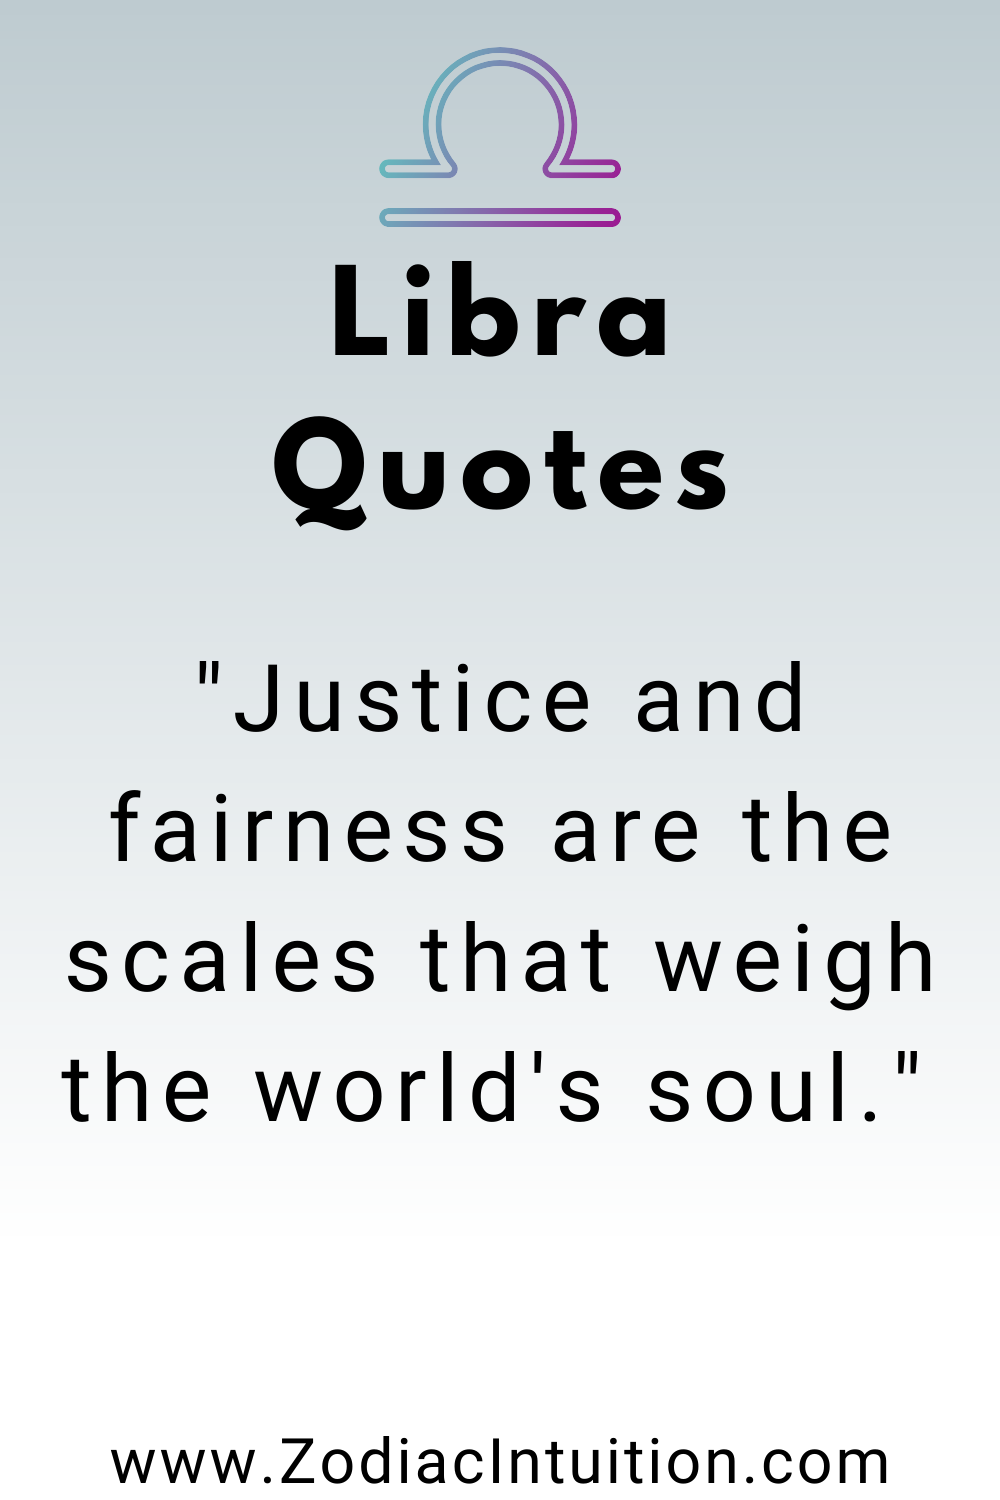 Top 5 Libra Quotes And Inspiration